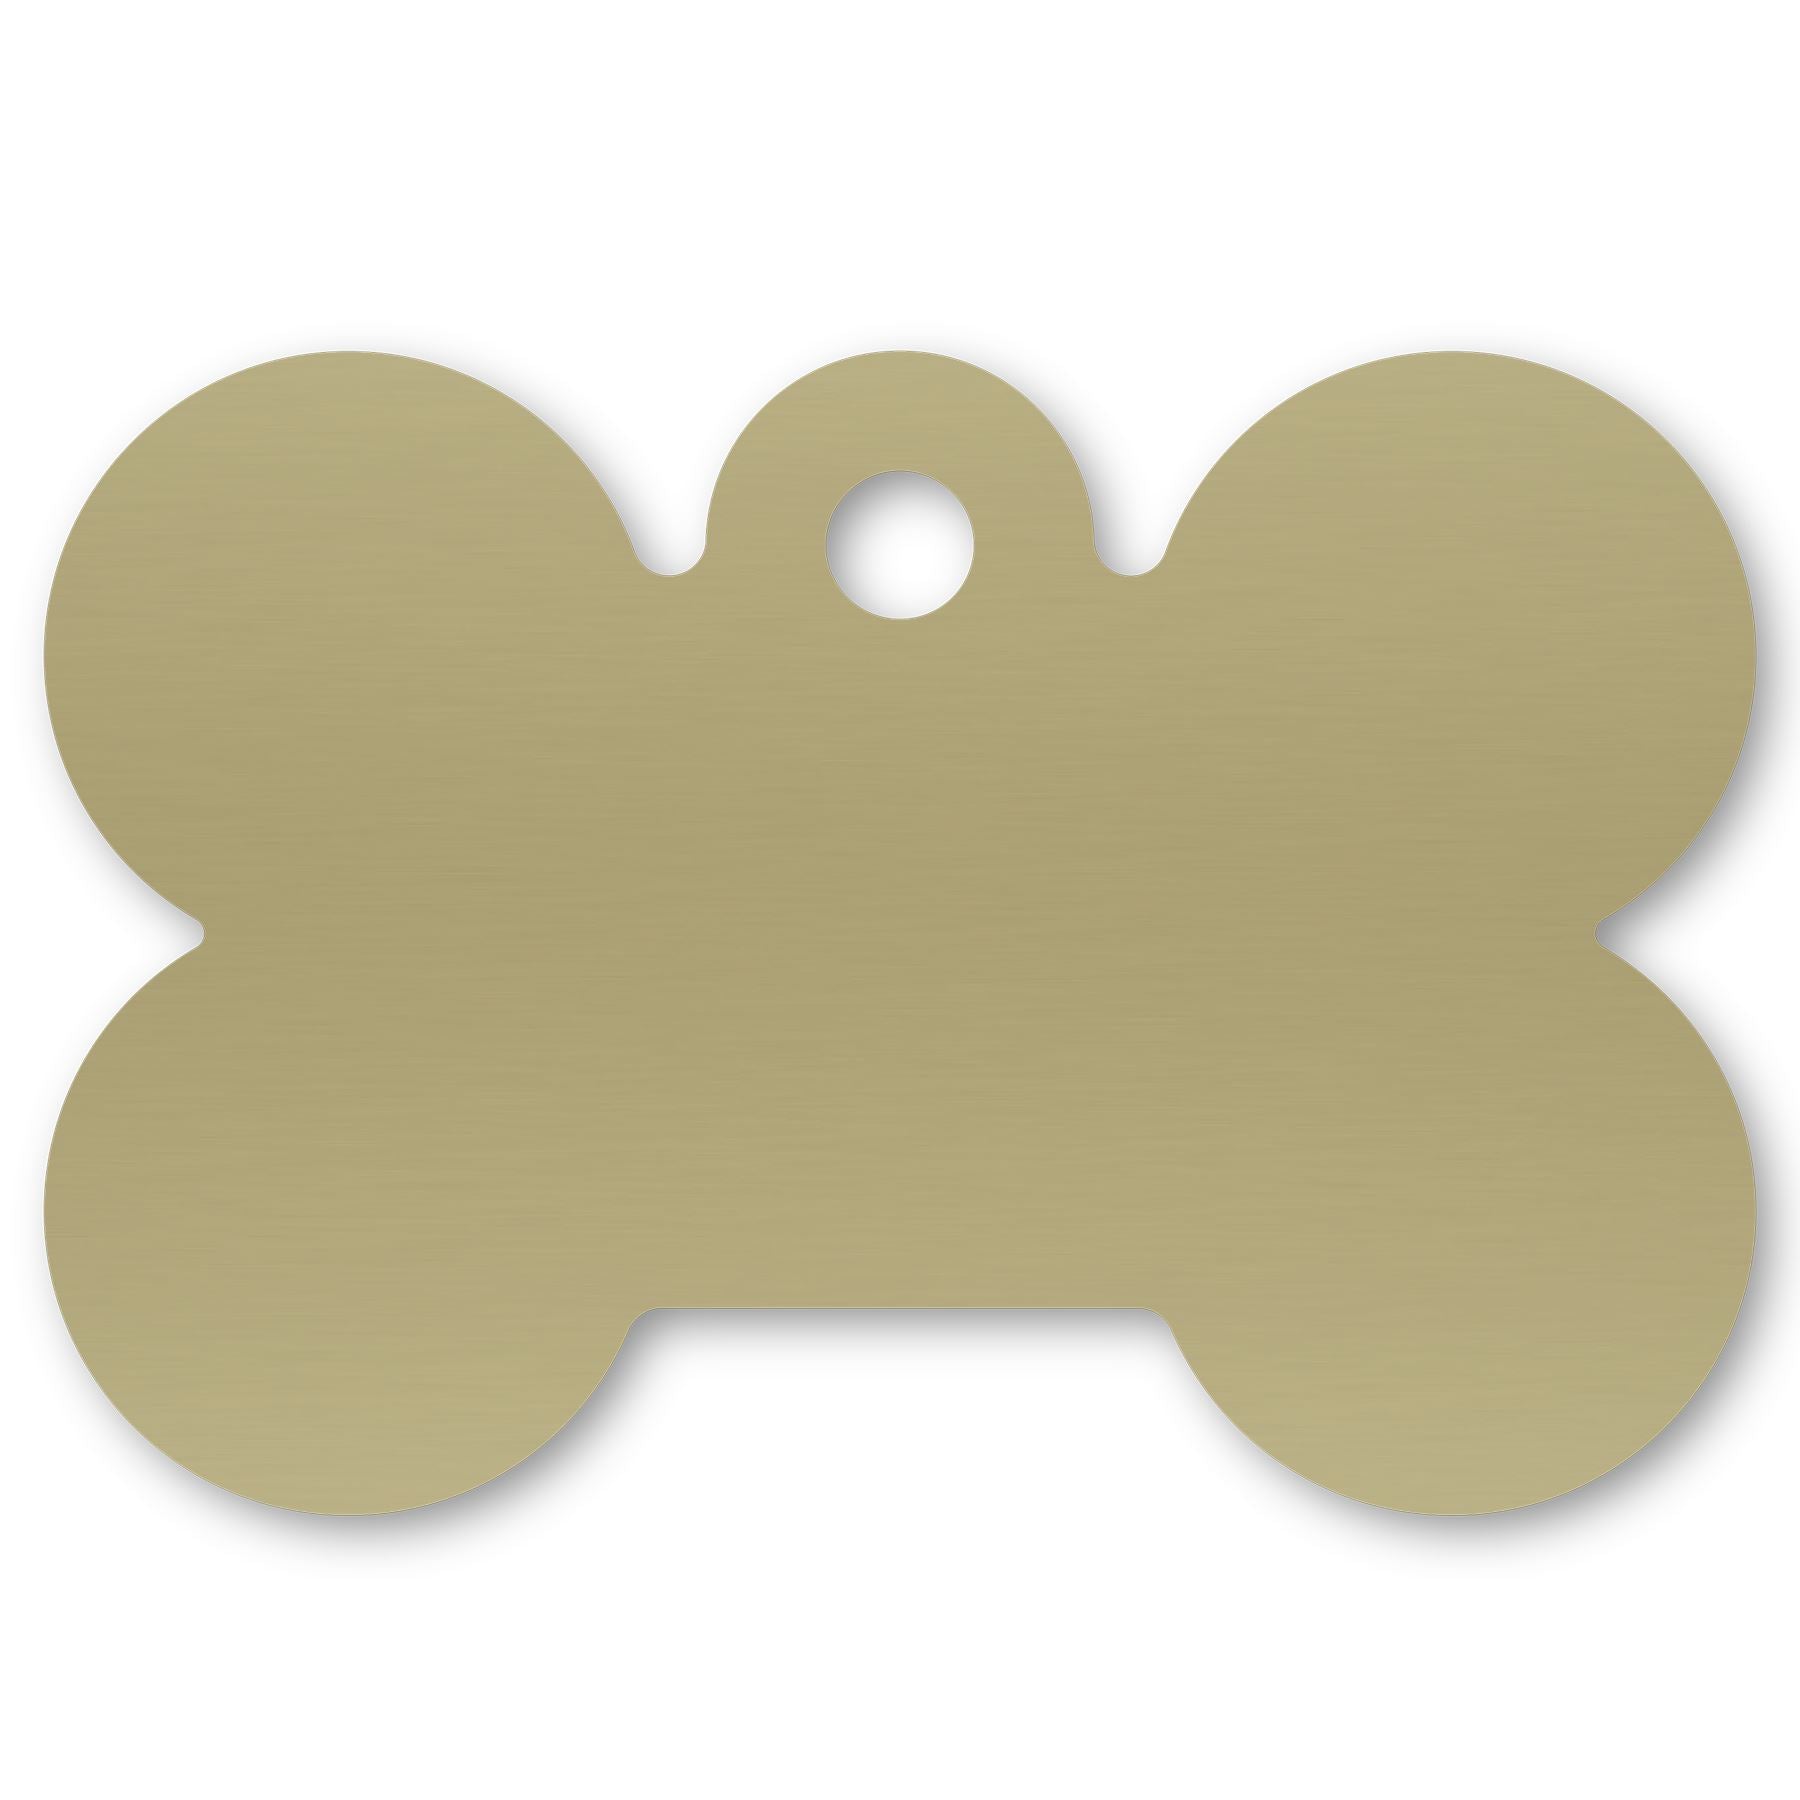 Anodized Aluminum Dog Bone Shaped Tags, 1-1/32" x 1-5/16" with 1/8" Hole, Laser Engraved Metal Tags Craftworks NW Gold 